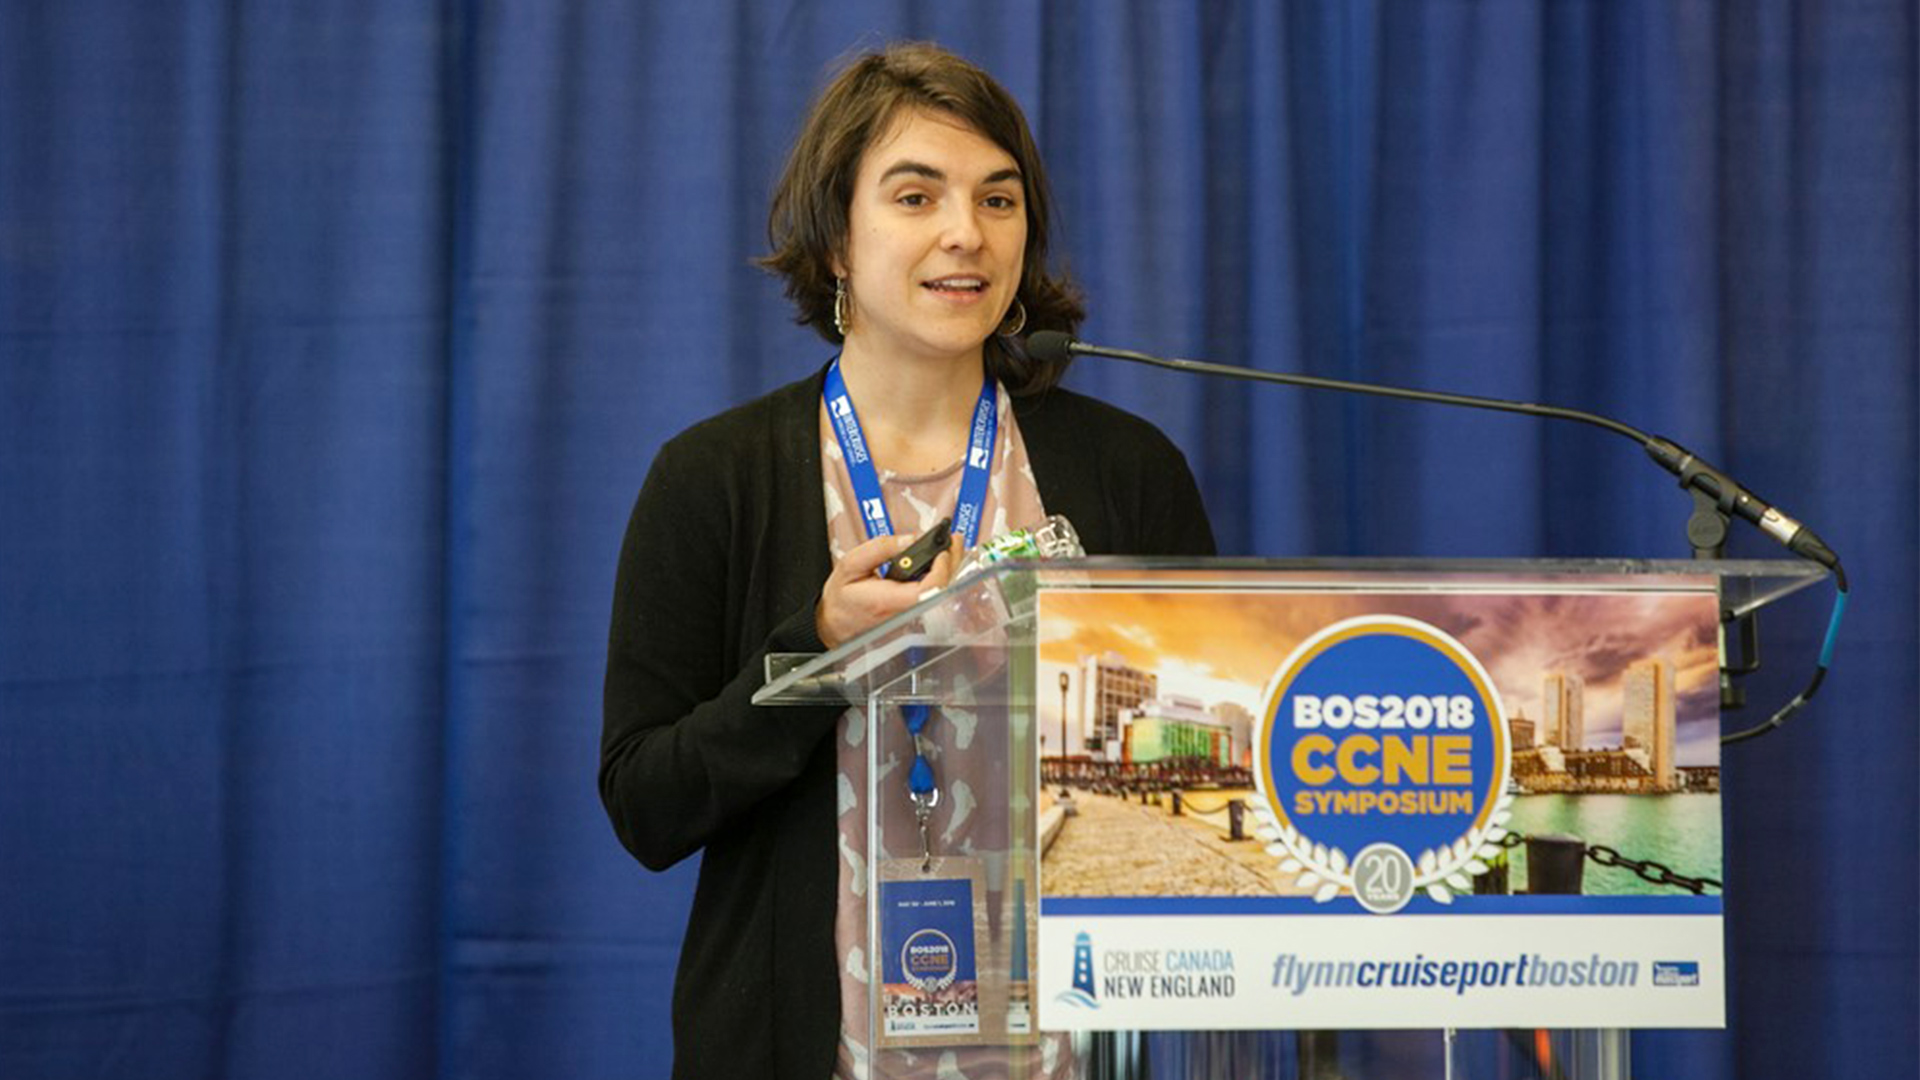 A woman speaks at a conference podium at the Cruise Canada New England Symposium in Boston in 2018